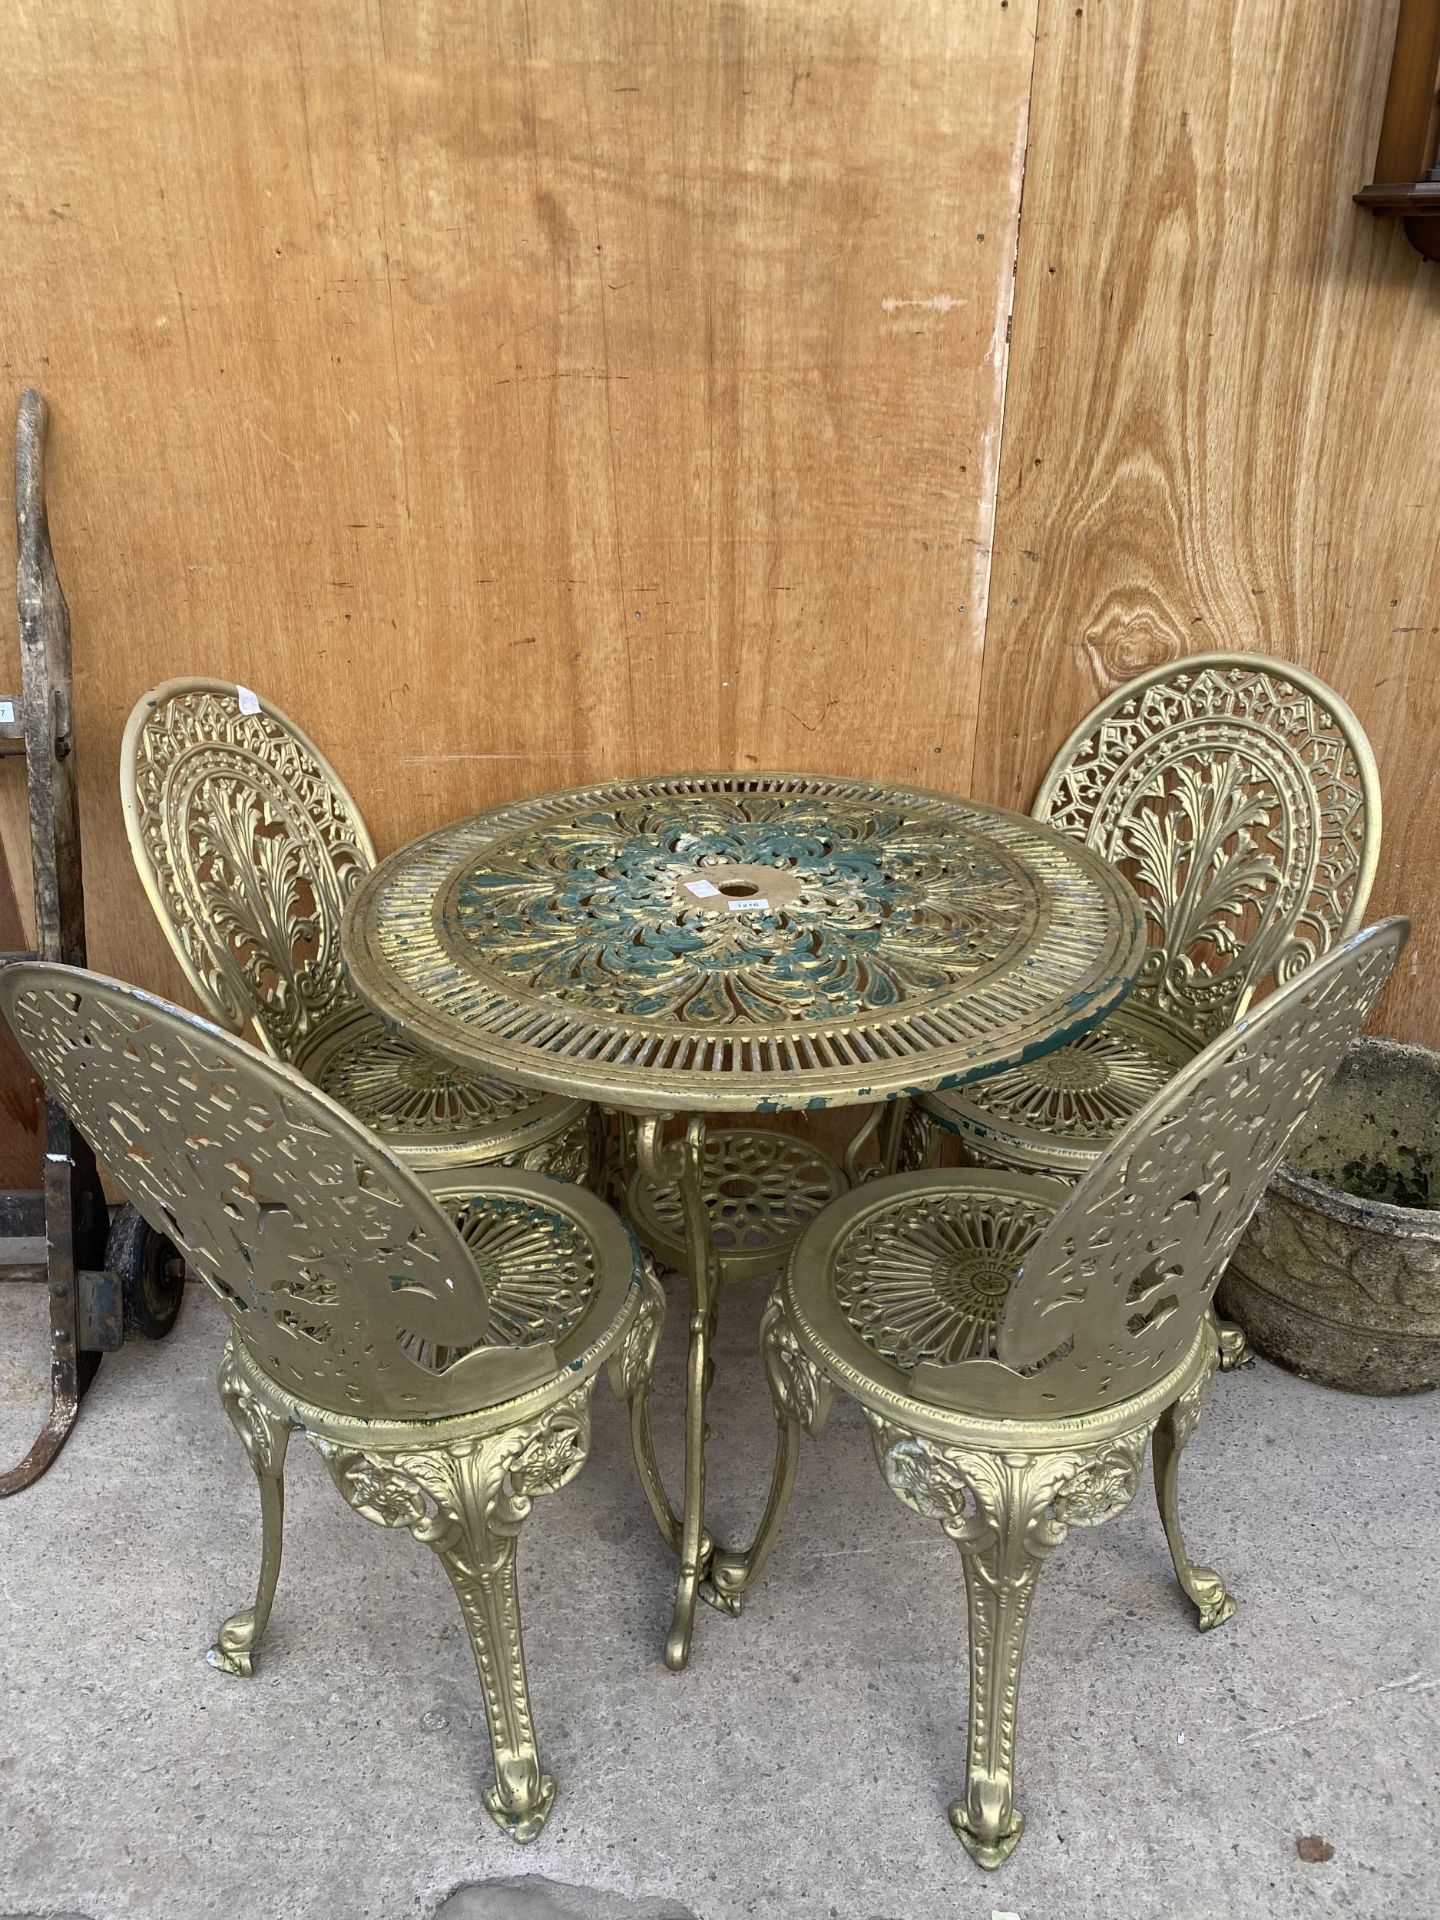 A VINTAGE STYLE CAST ALLOY BISTRO SET COMPRISING OF A ROUND TABLE AND FOUR CHAIRS